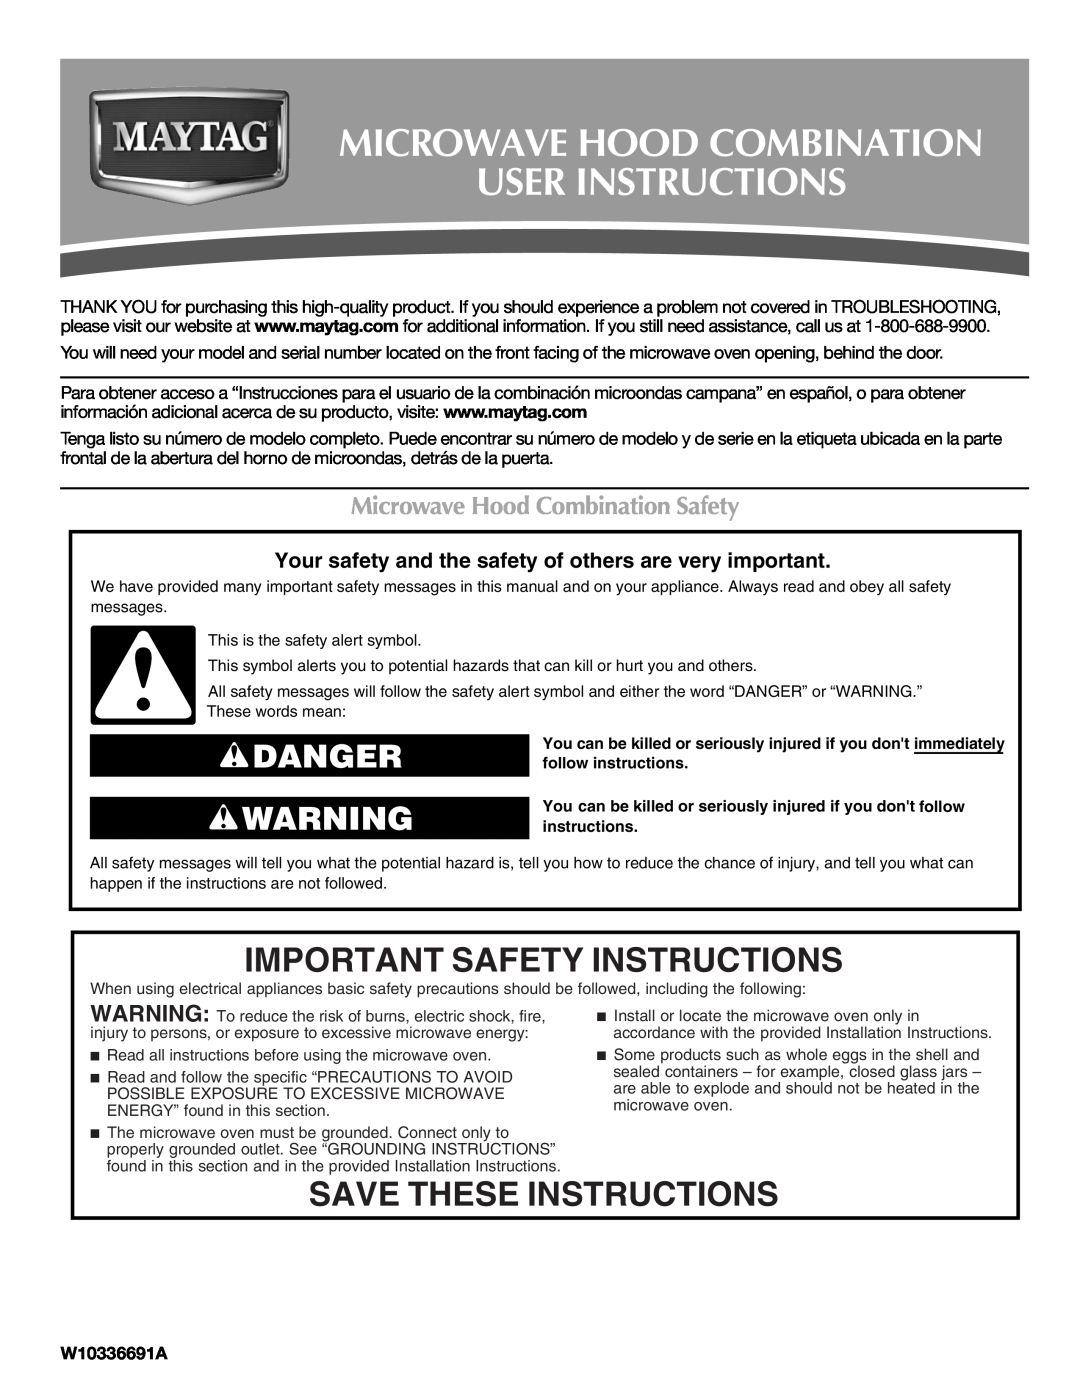 Maytag W10336691A important safety instructions Important Safety Instructions, Save These Instructions, Danger 